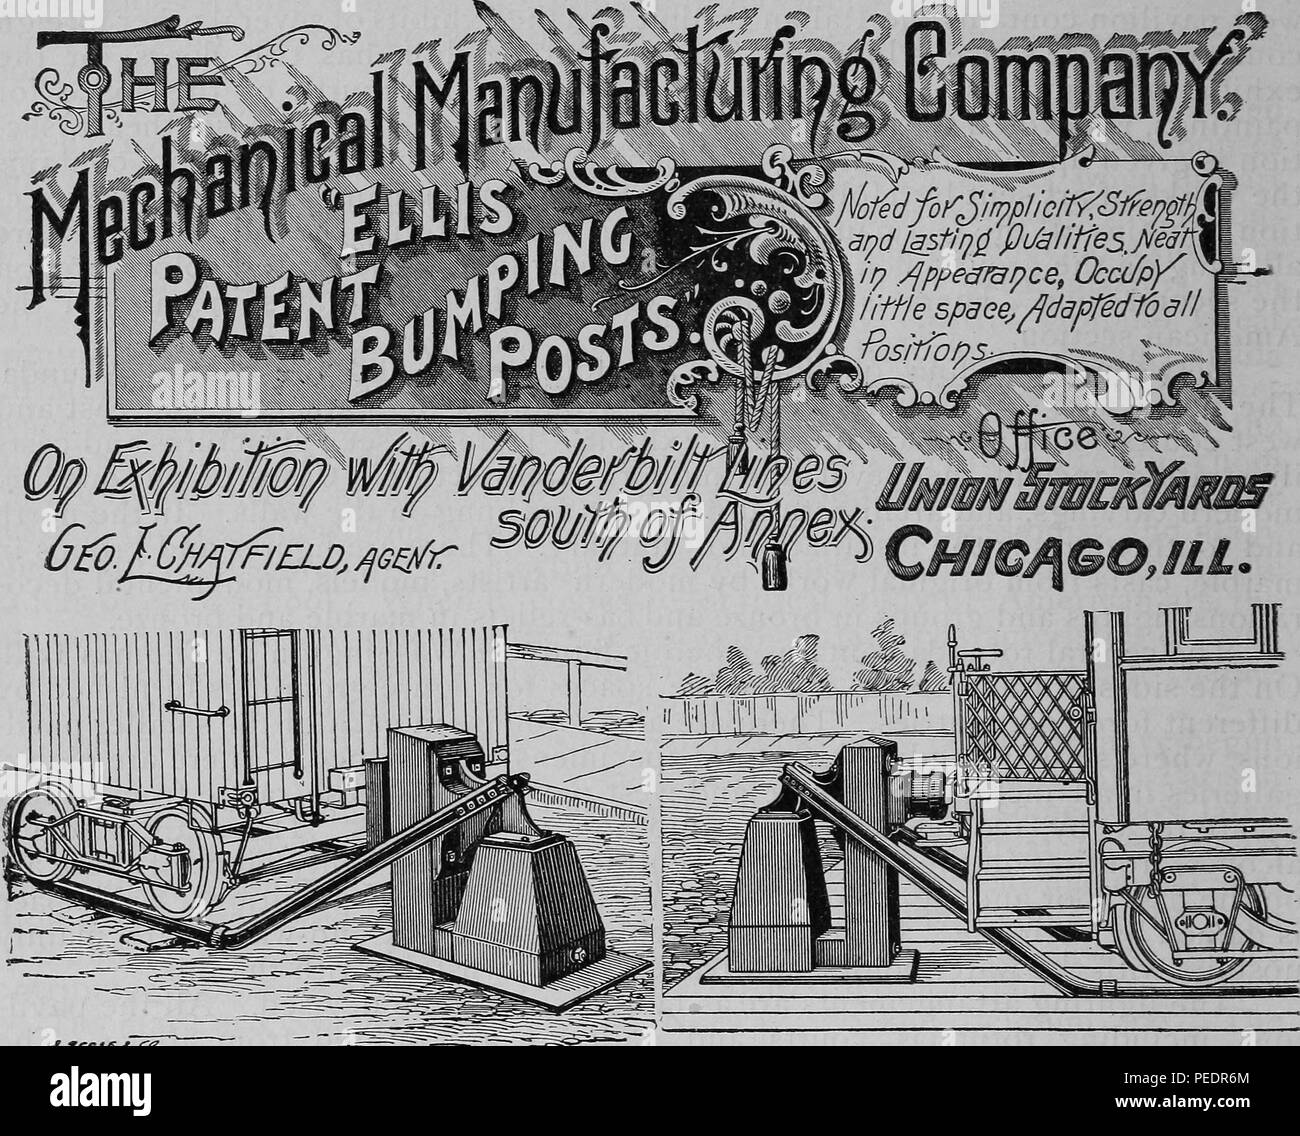 Black and white print advertising the 'Ellis' Patent Bumping Post, a railroad line safety stop made by The Mechanical Manufacturing Co, which was exhibited with Vanderbilt Lines south of Annex, at the World's Columbian Exposition aka the Chicago World's Fair, located in Chicago Illinois, USA, published in 'The Official Directory of the World's Columbian Exposition', 1893. Courtesy Internet Archive. () Stock Photo